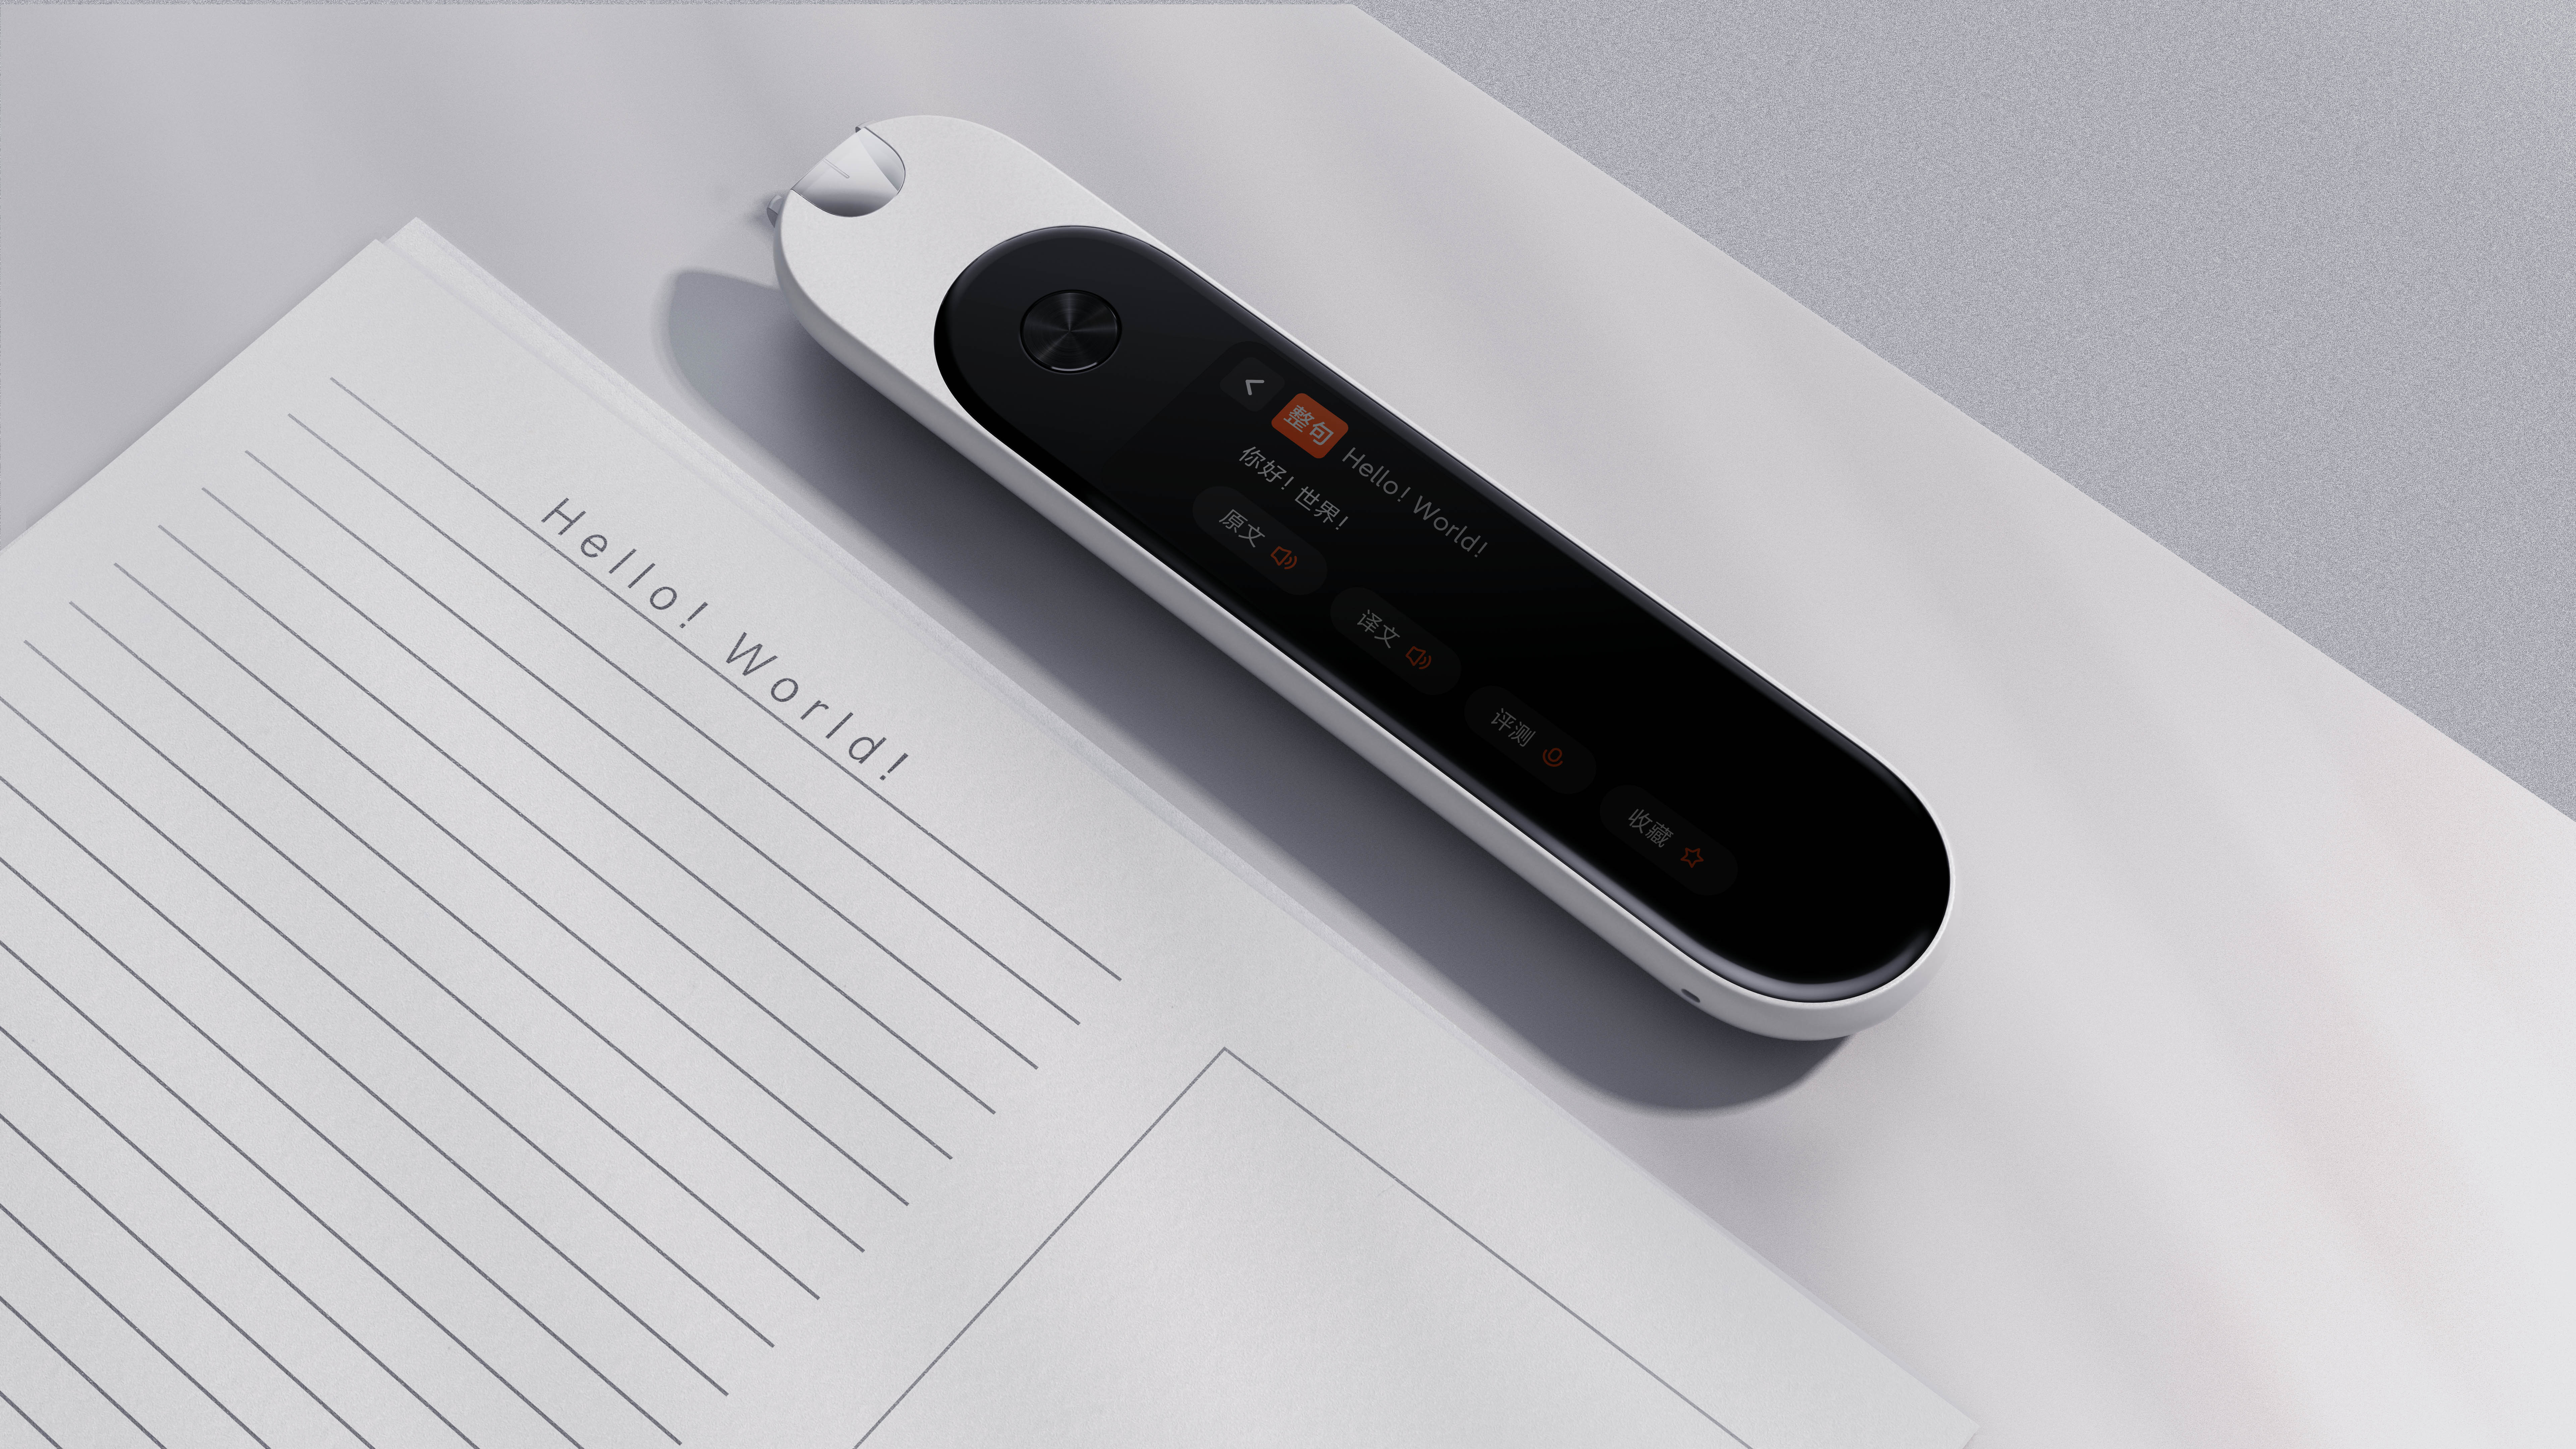 The MIJIA Dictionary Pen